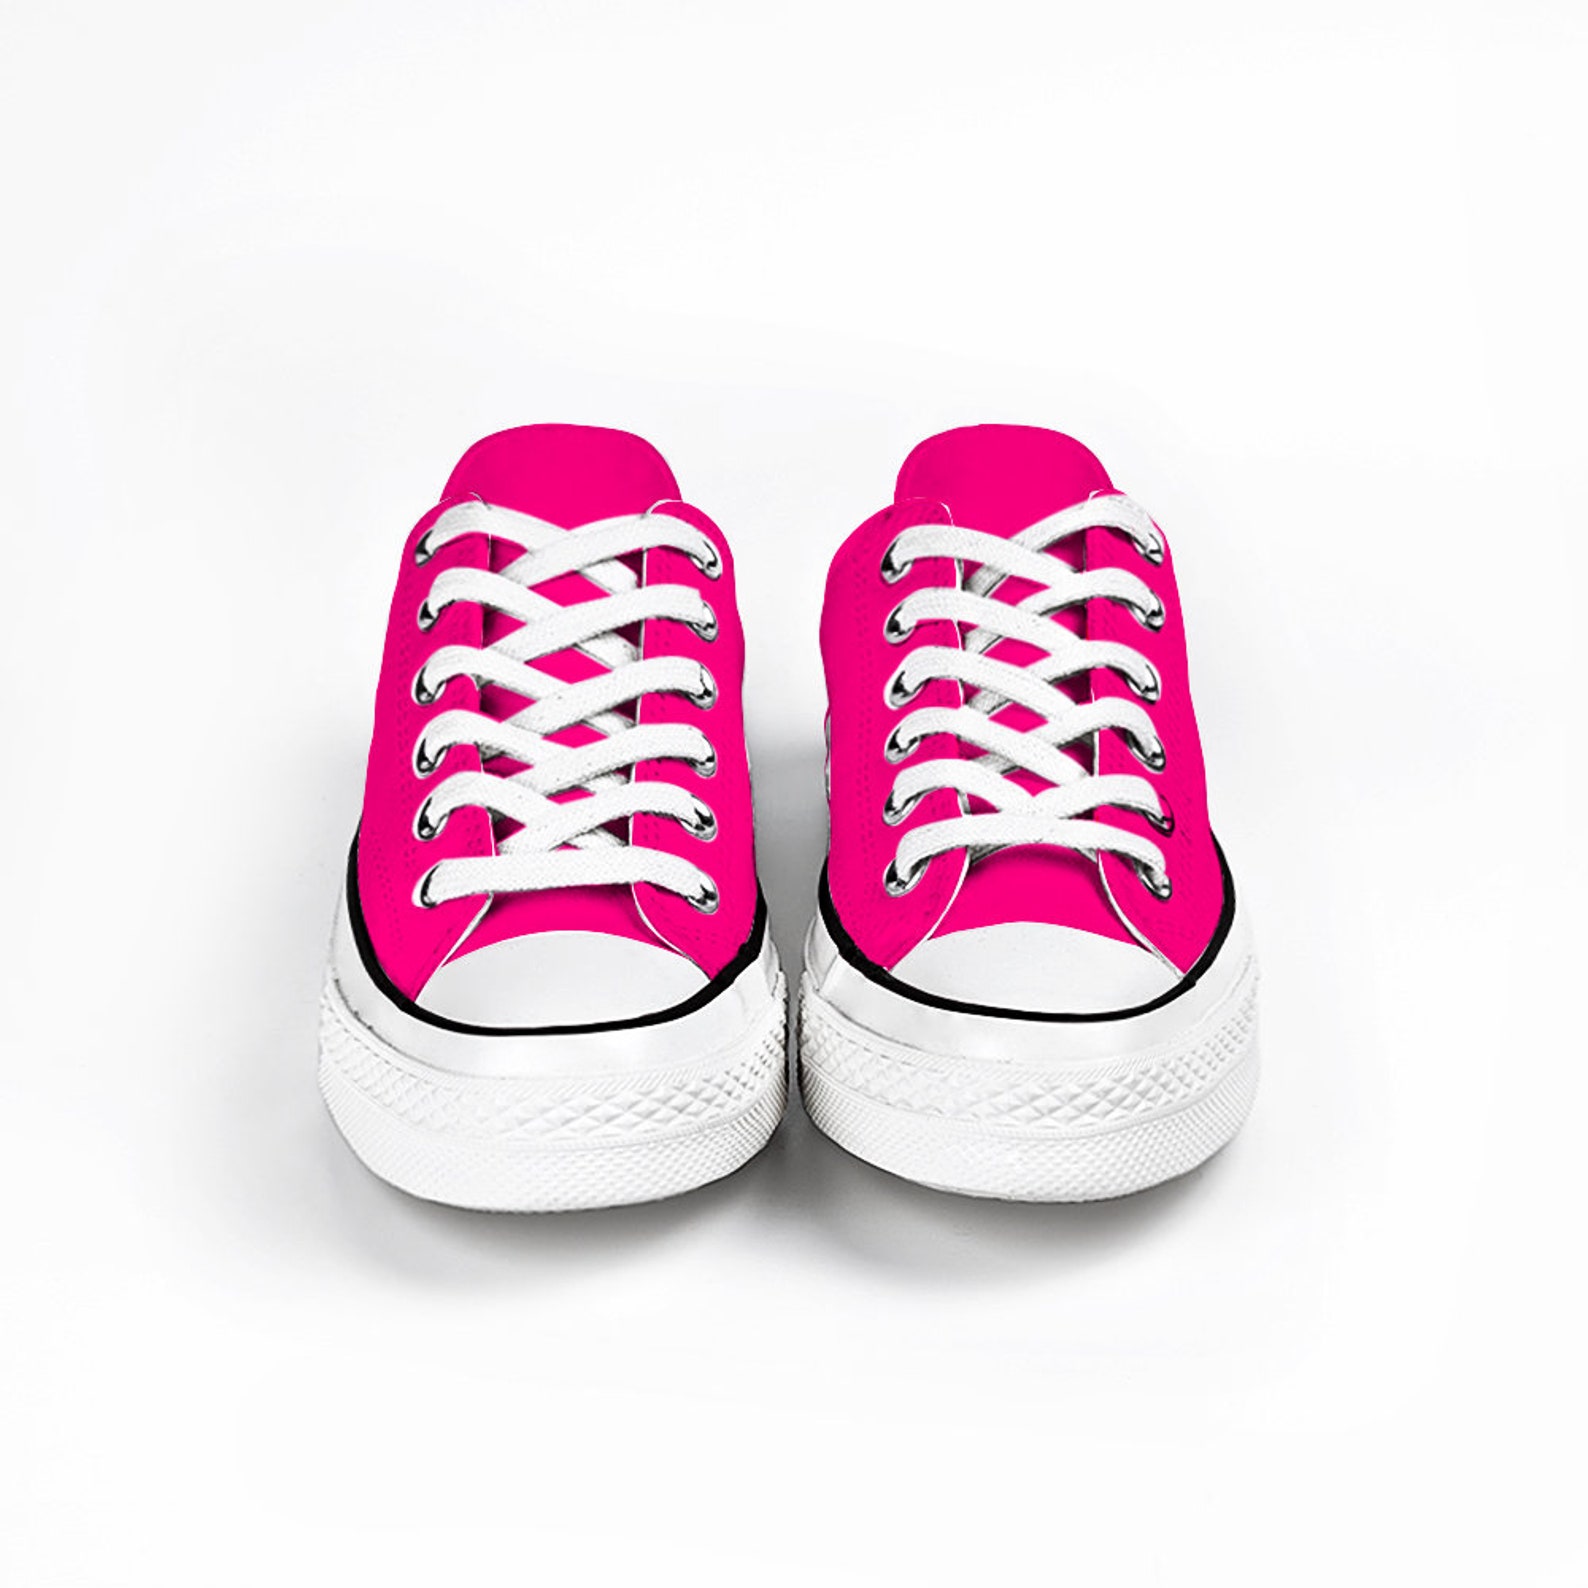 Neon Pink Shoes Kidcore Shoes Hot Pink Converse Look | Etsy